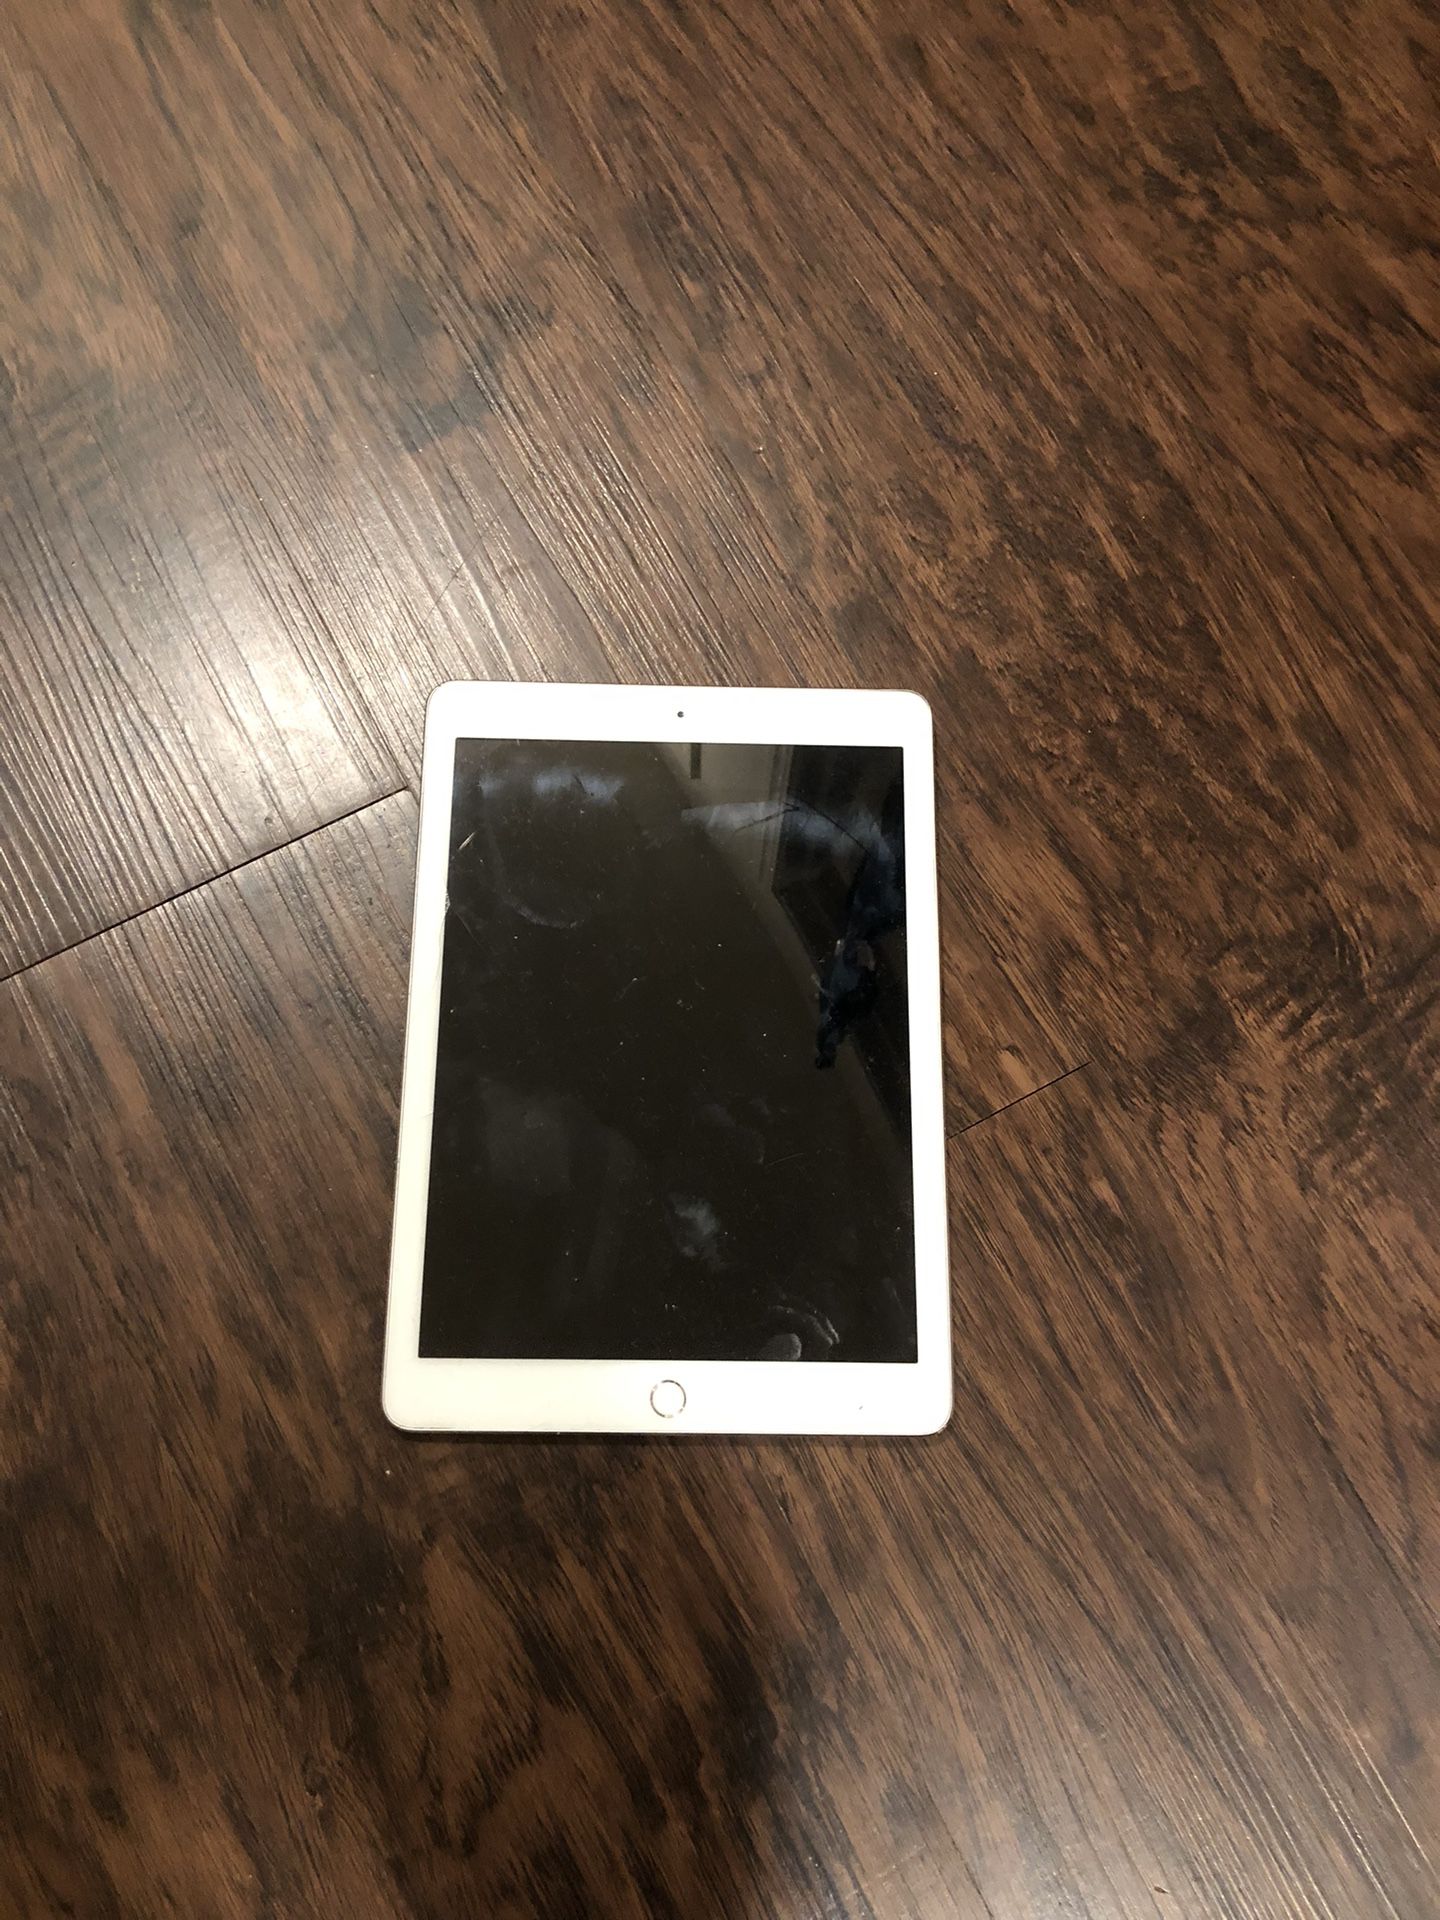 iPad Air 2 16GB WI-FI ONLY (ATTENTION READ DESCRIPTION👀 and MISSING Chargers 🔌) Pick Up Only No Trade 👉Firm On Price👀$40👈